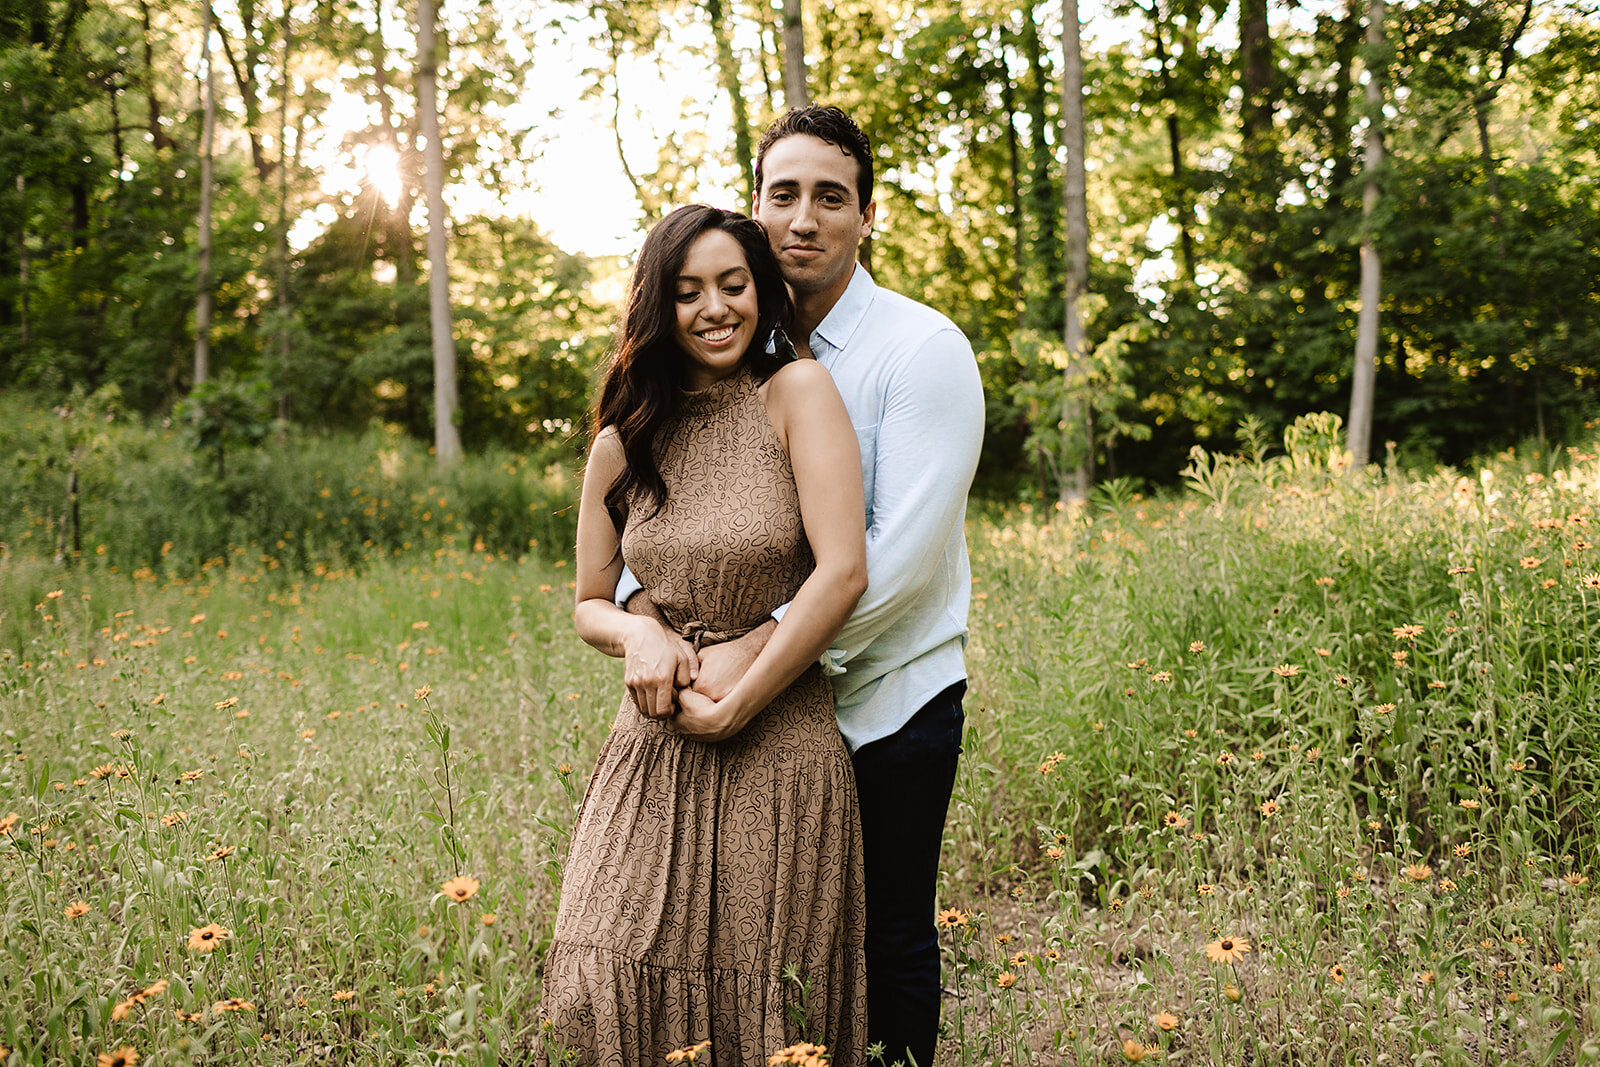 Grecia and Micah, Engagement session, Holliday Park, Indianapolis Indiana, Emily Wehner Photography-133_websize.jpg